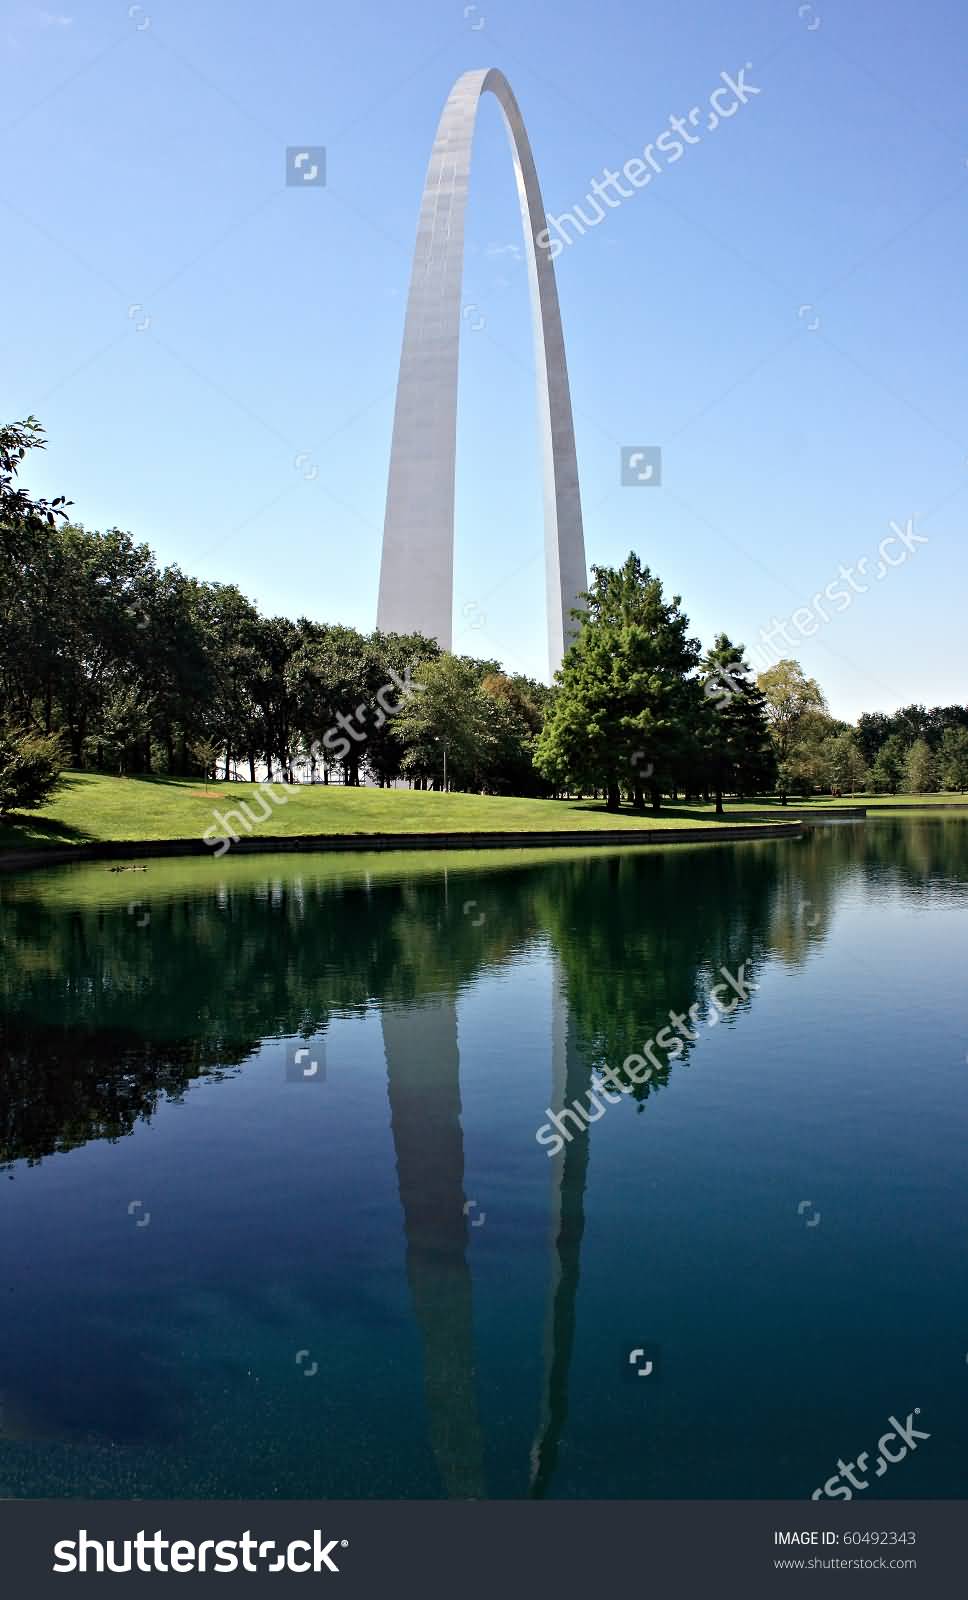 Gateway Arch In St Louis With Reflection In Pond